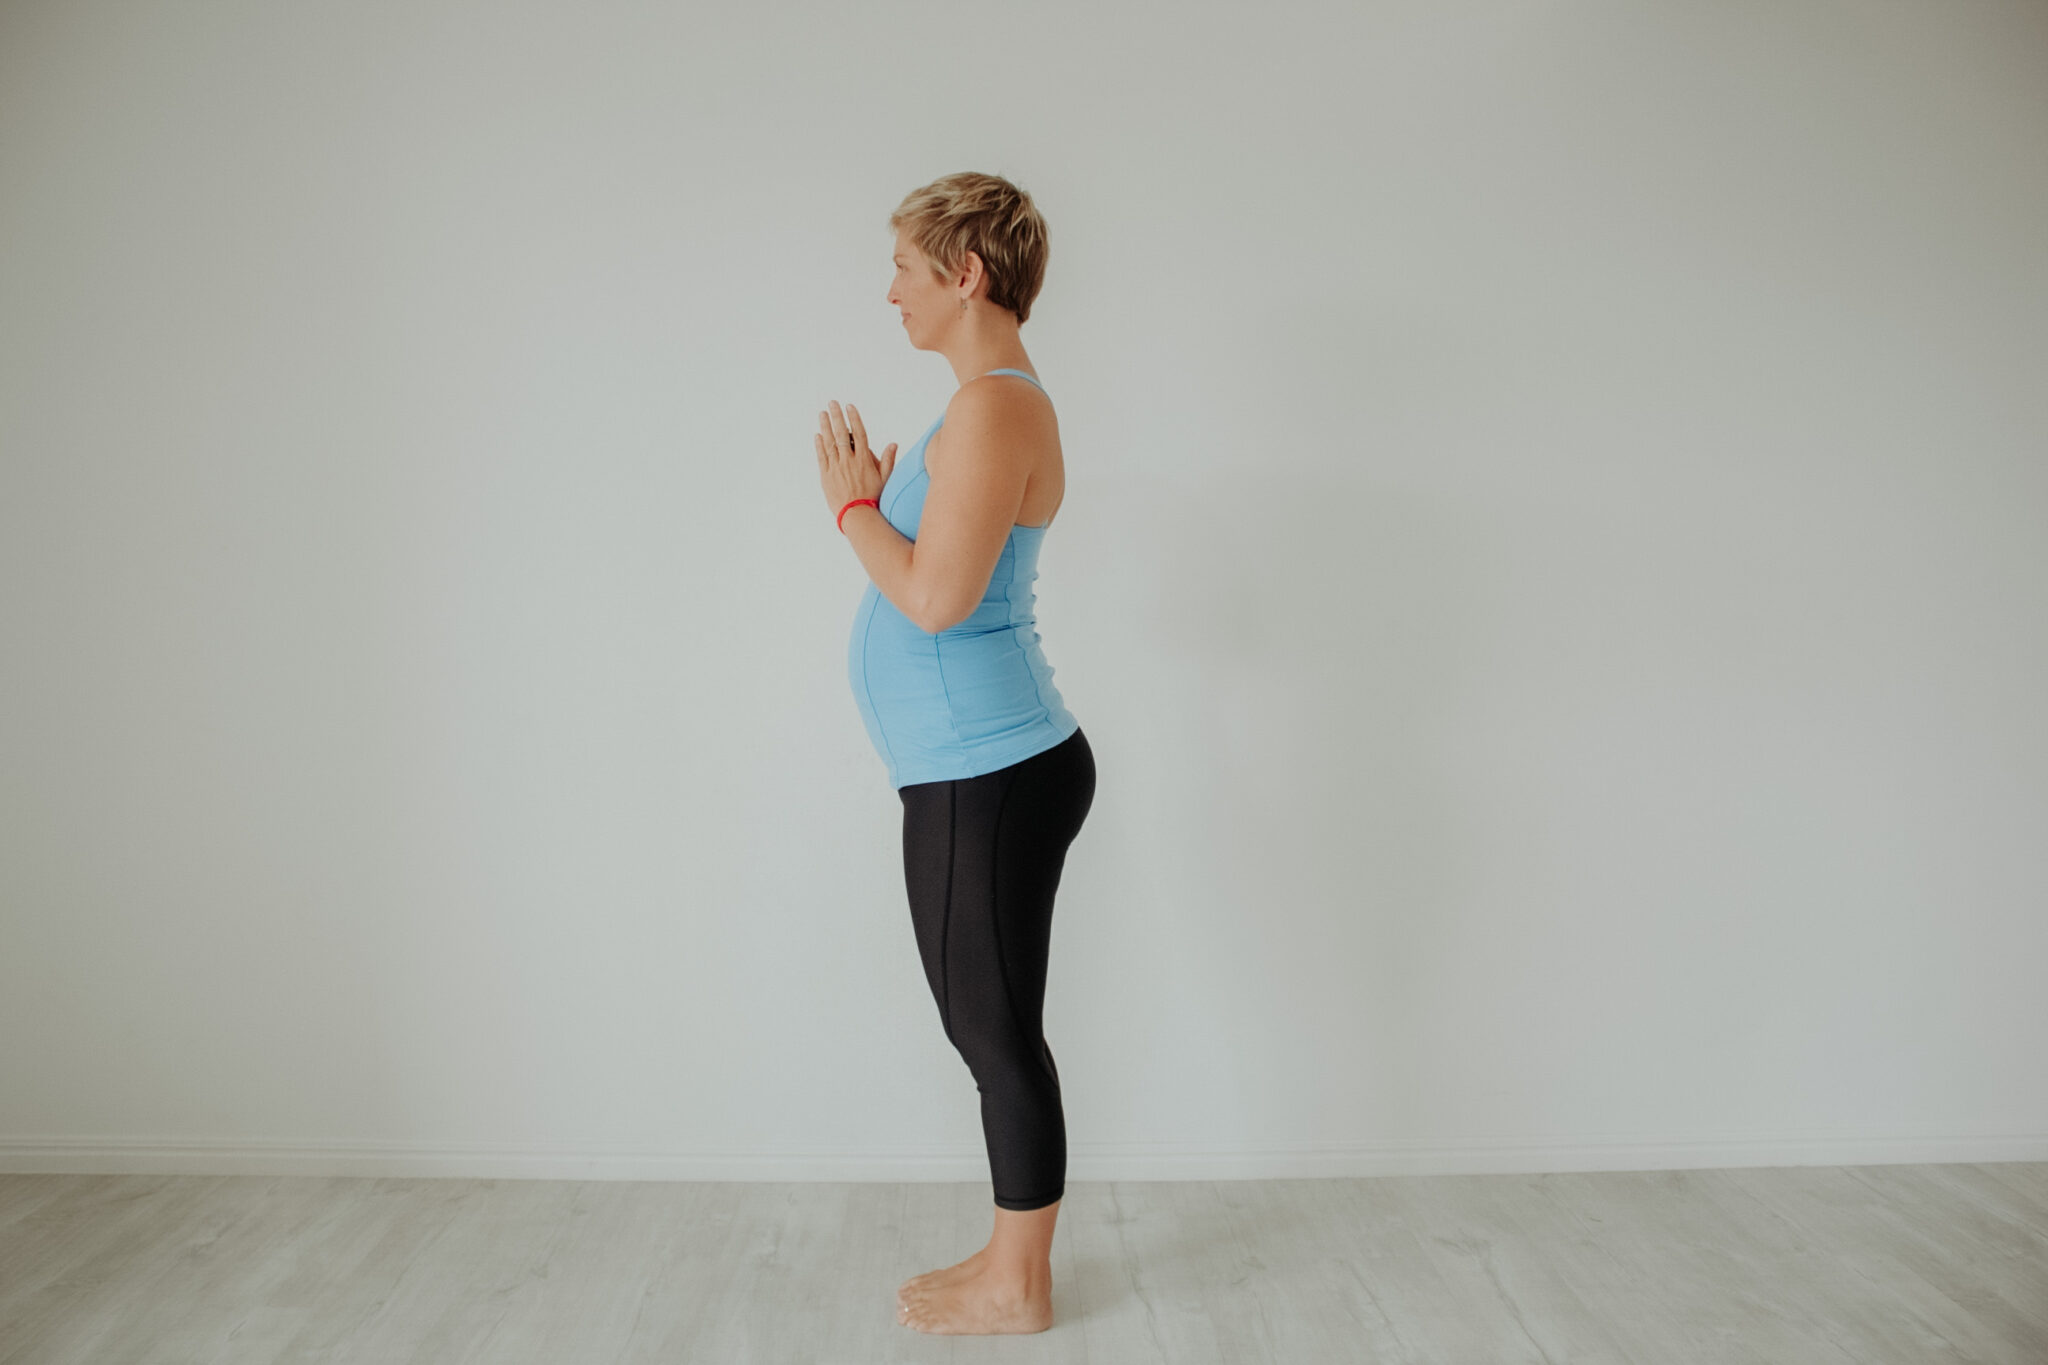 Yoga poses for pregnant women - Times of India